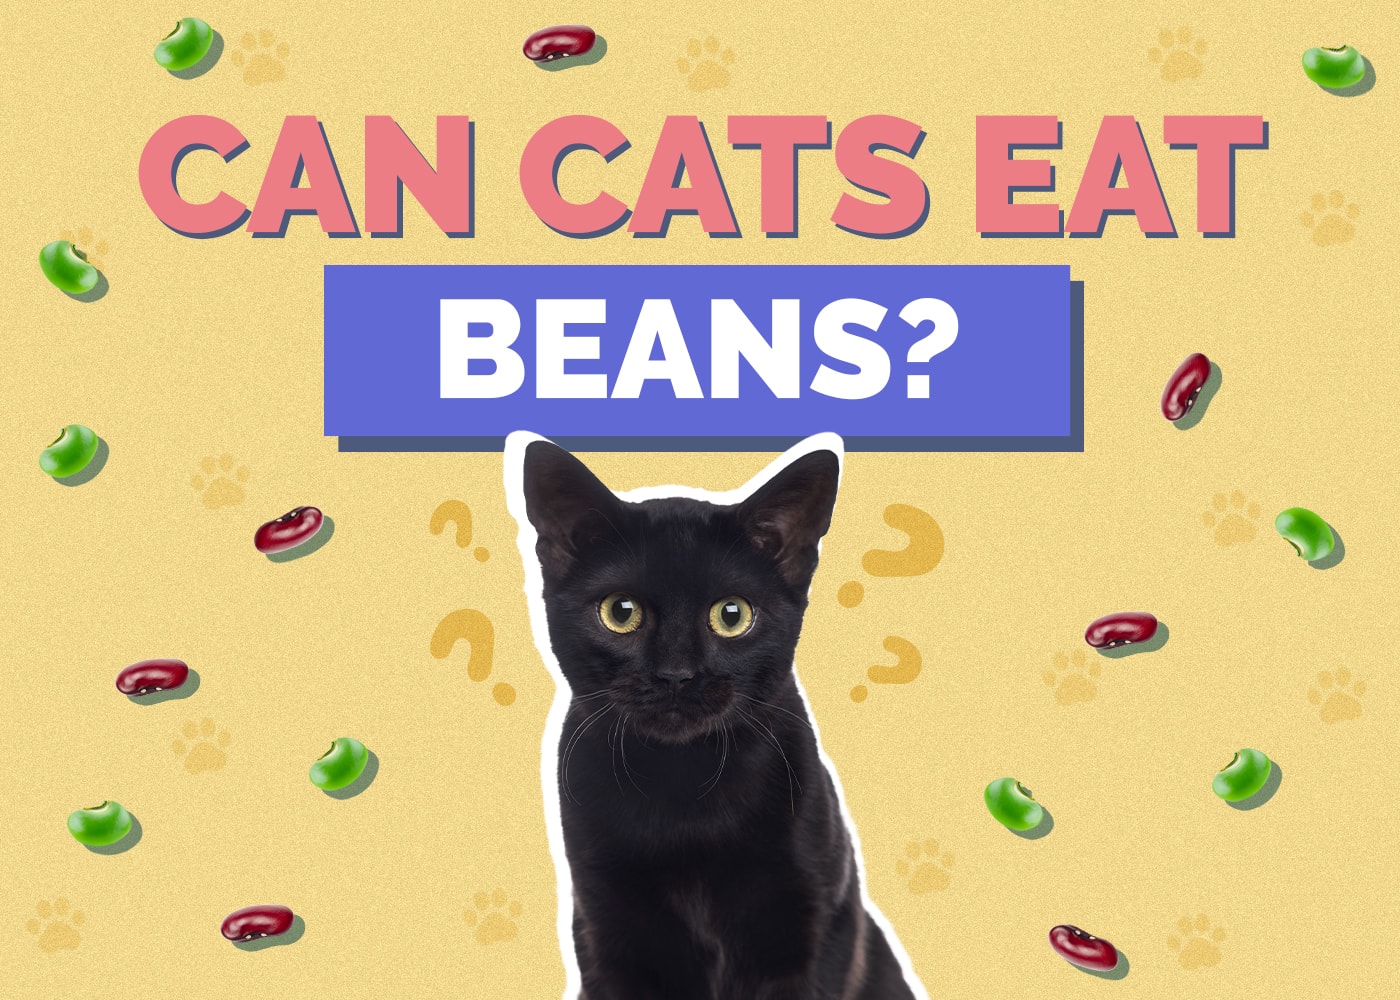 Can Cats Eat beans